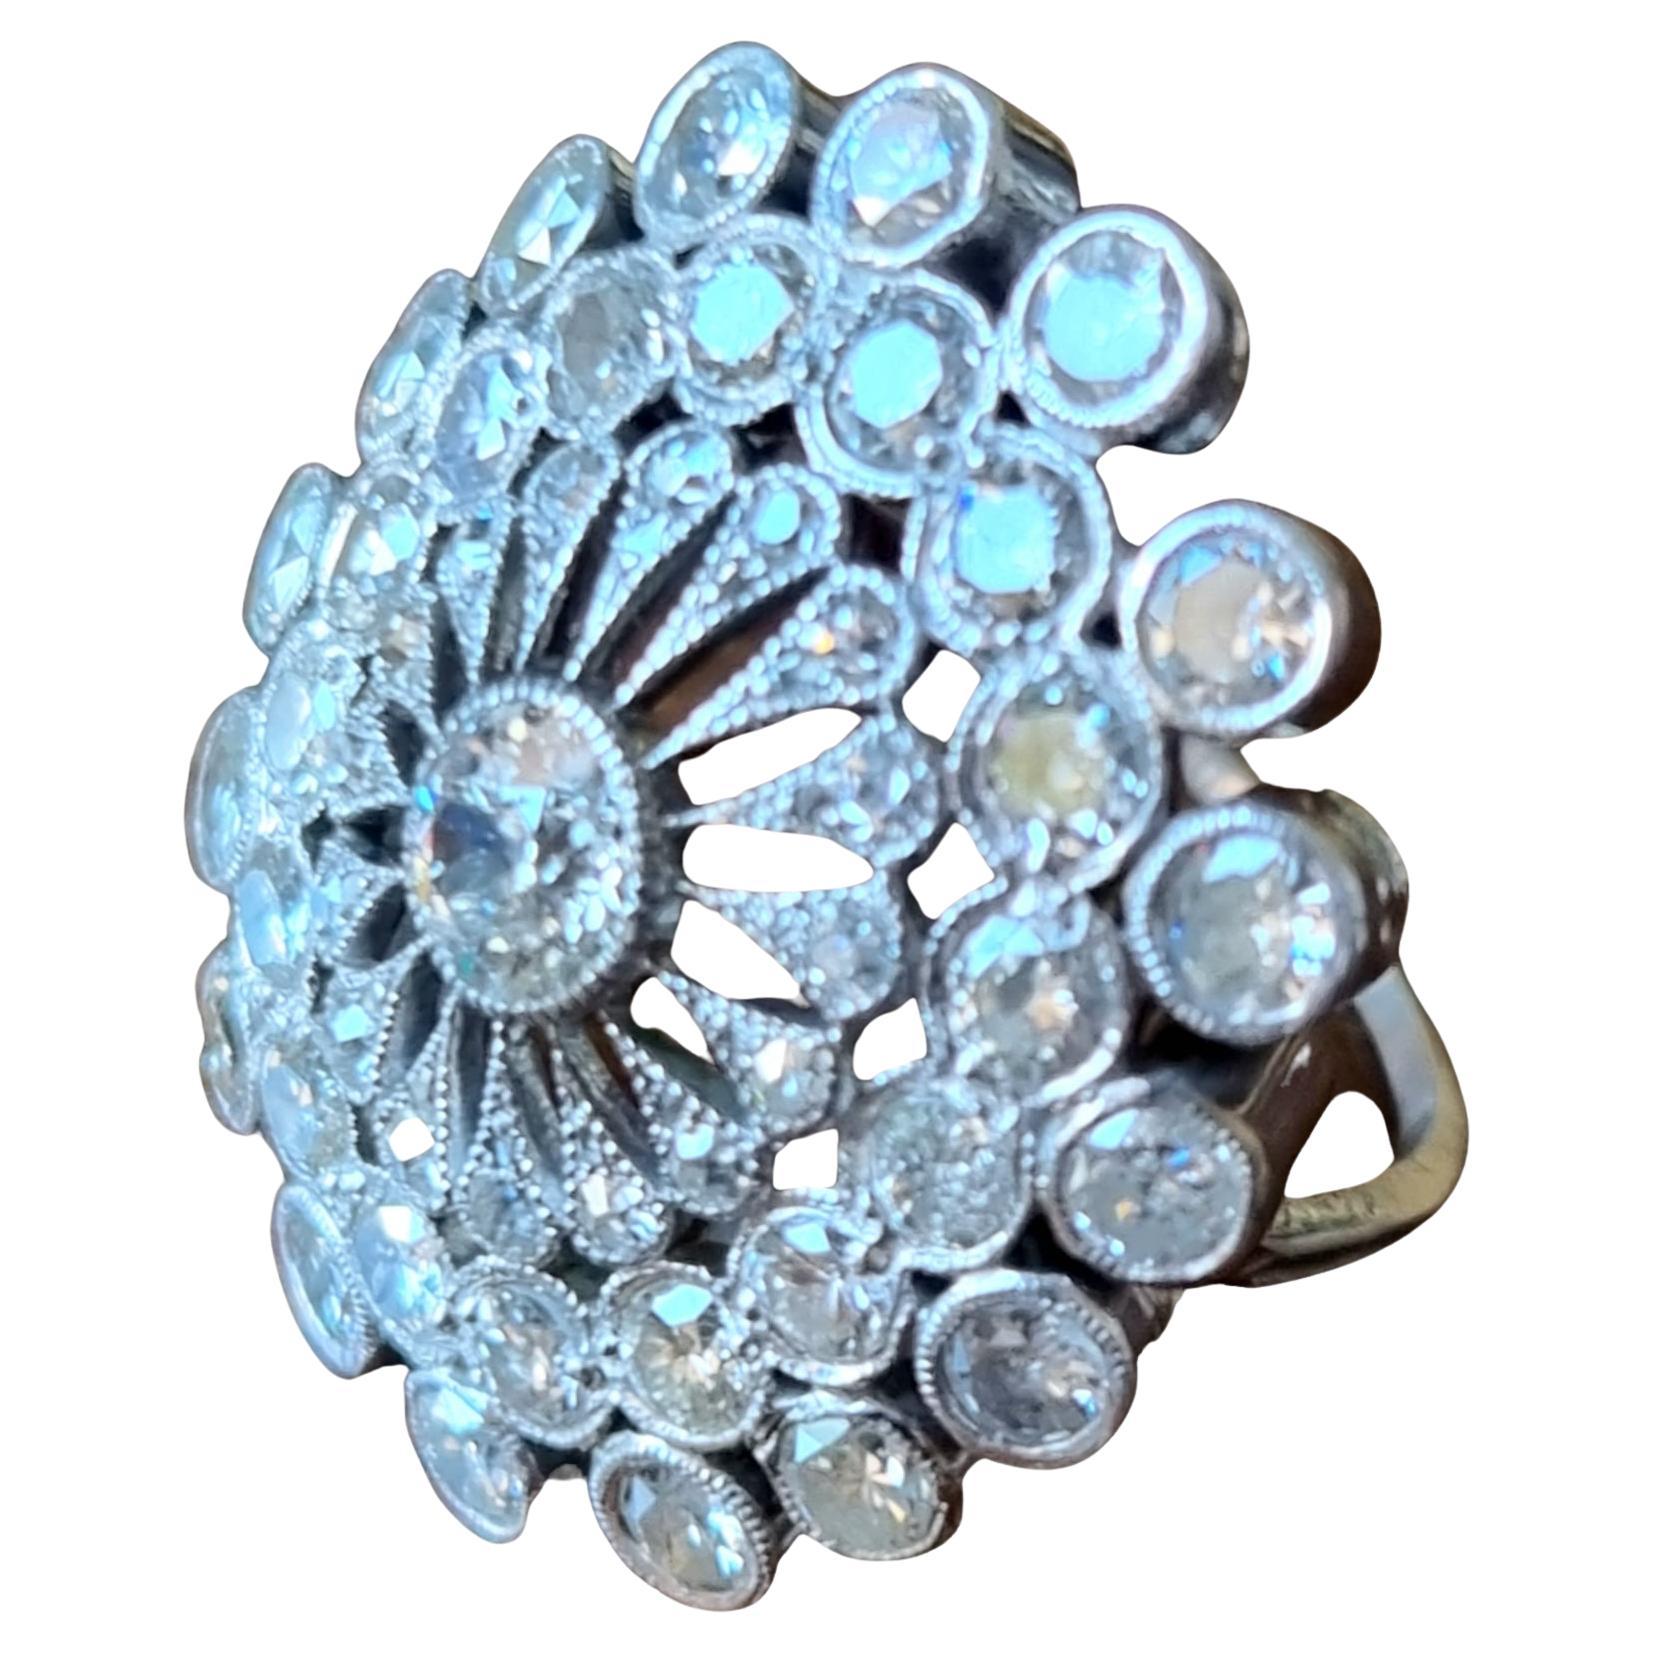 Early 20th Century Floral Spray Diamond Platinum Ring-
Mounted in platinum, handcrafted.
Rosette ring in platinum comprising an old-cut and brilliant-cut diamond flower, estimated weight approx. 4.45 carats. 
1 central Old European cut diamond